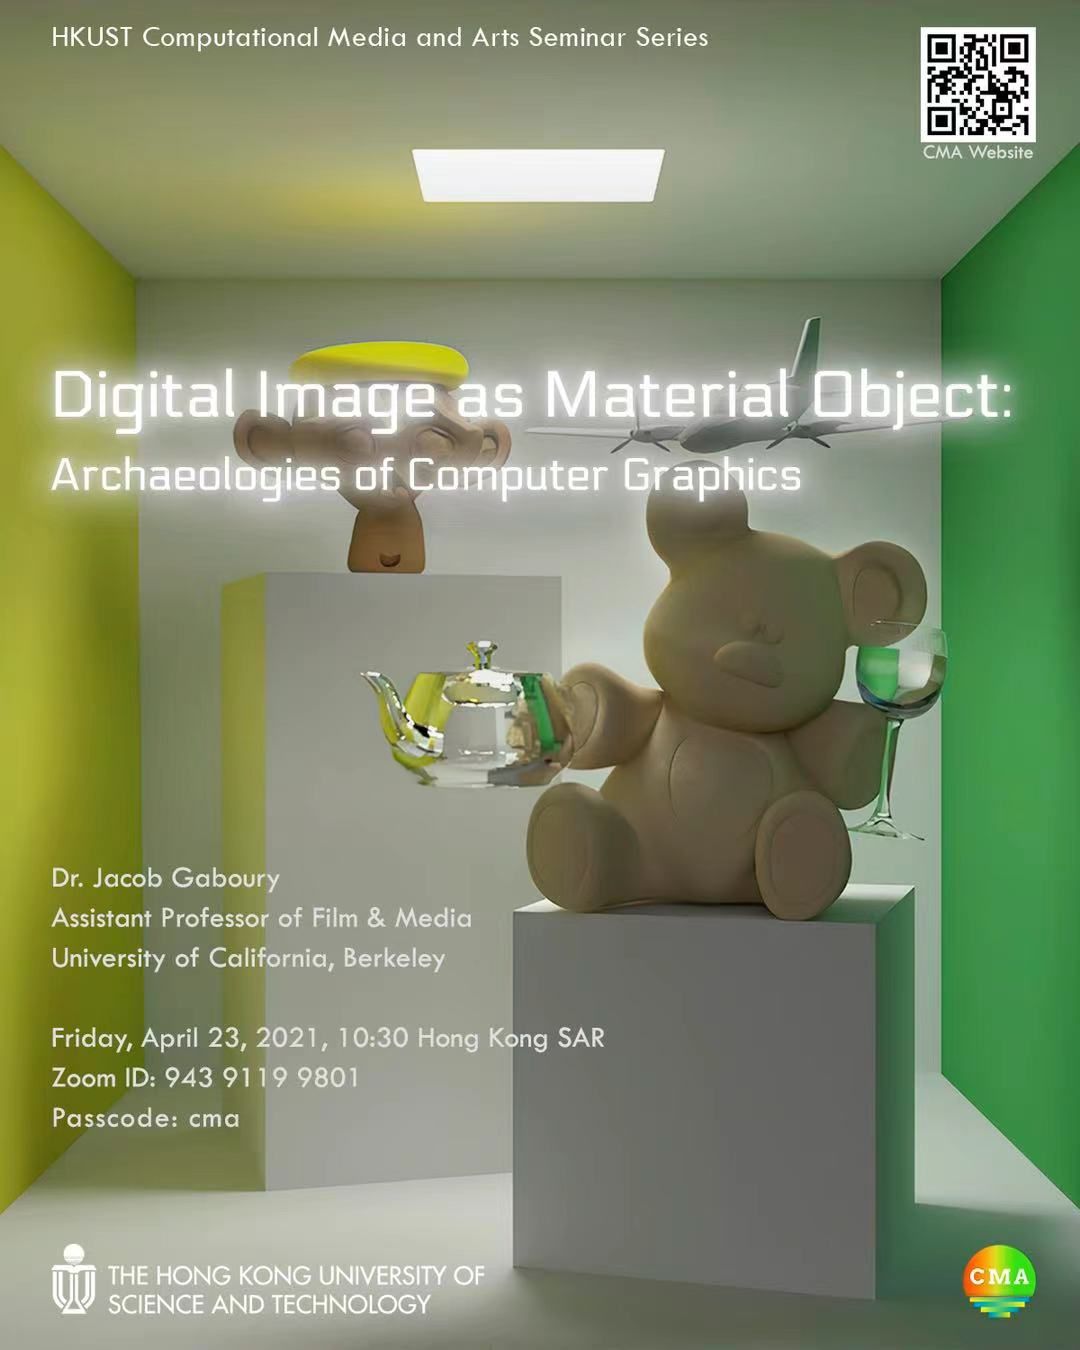 Digital Image as Material Object: Archaeologies of Computer Graphics